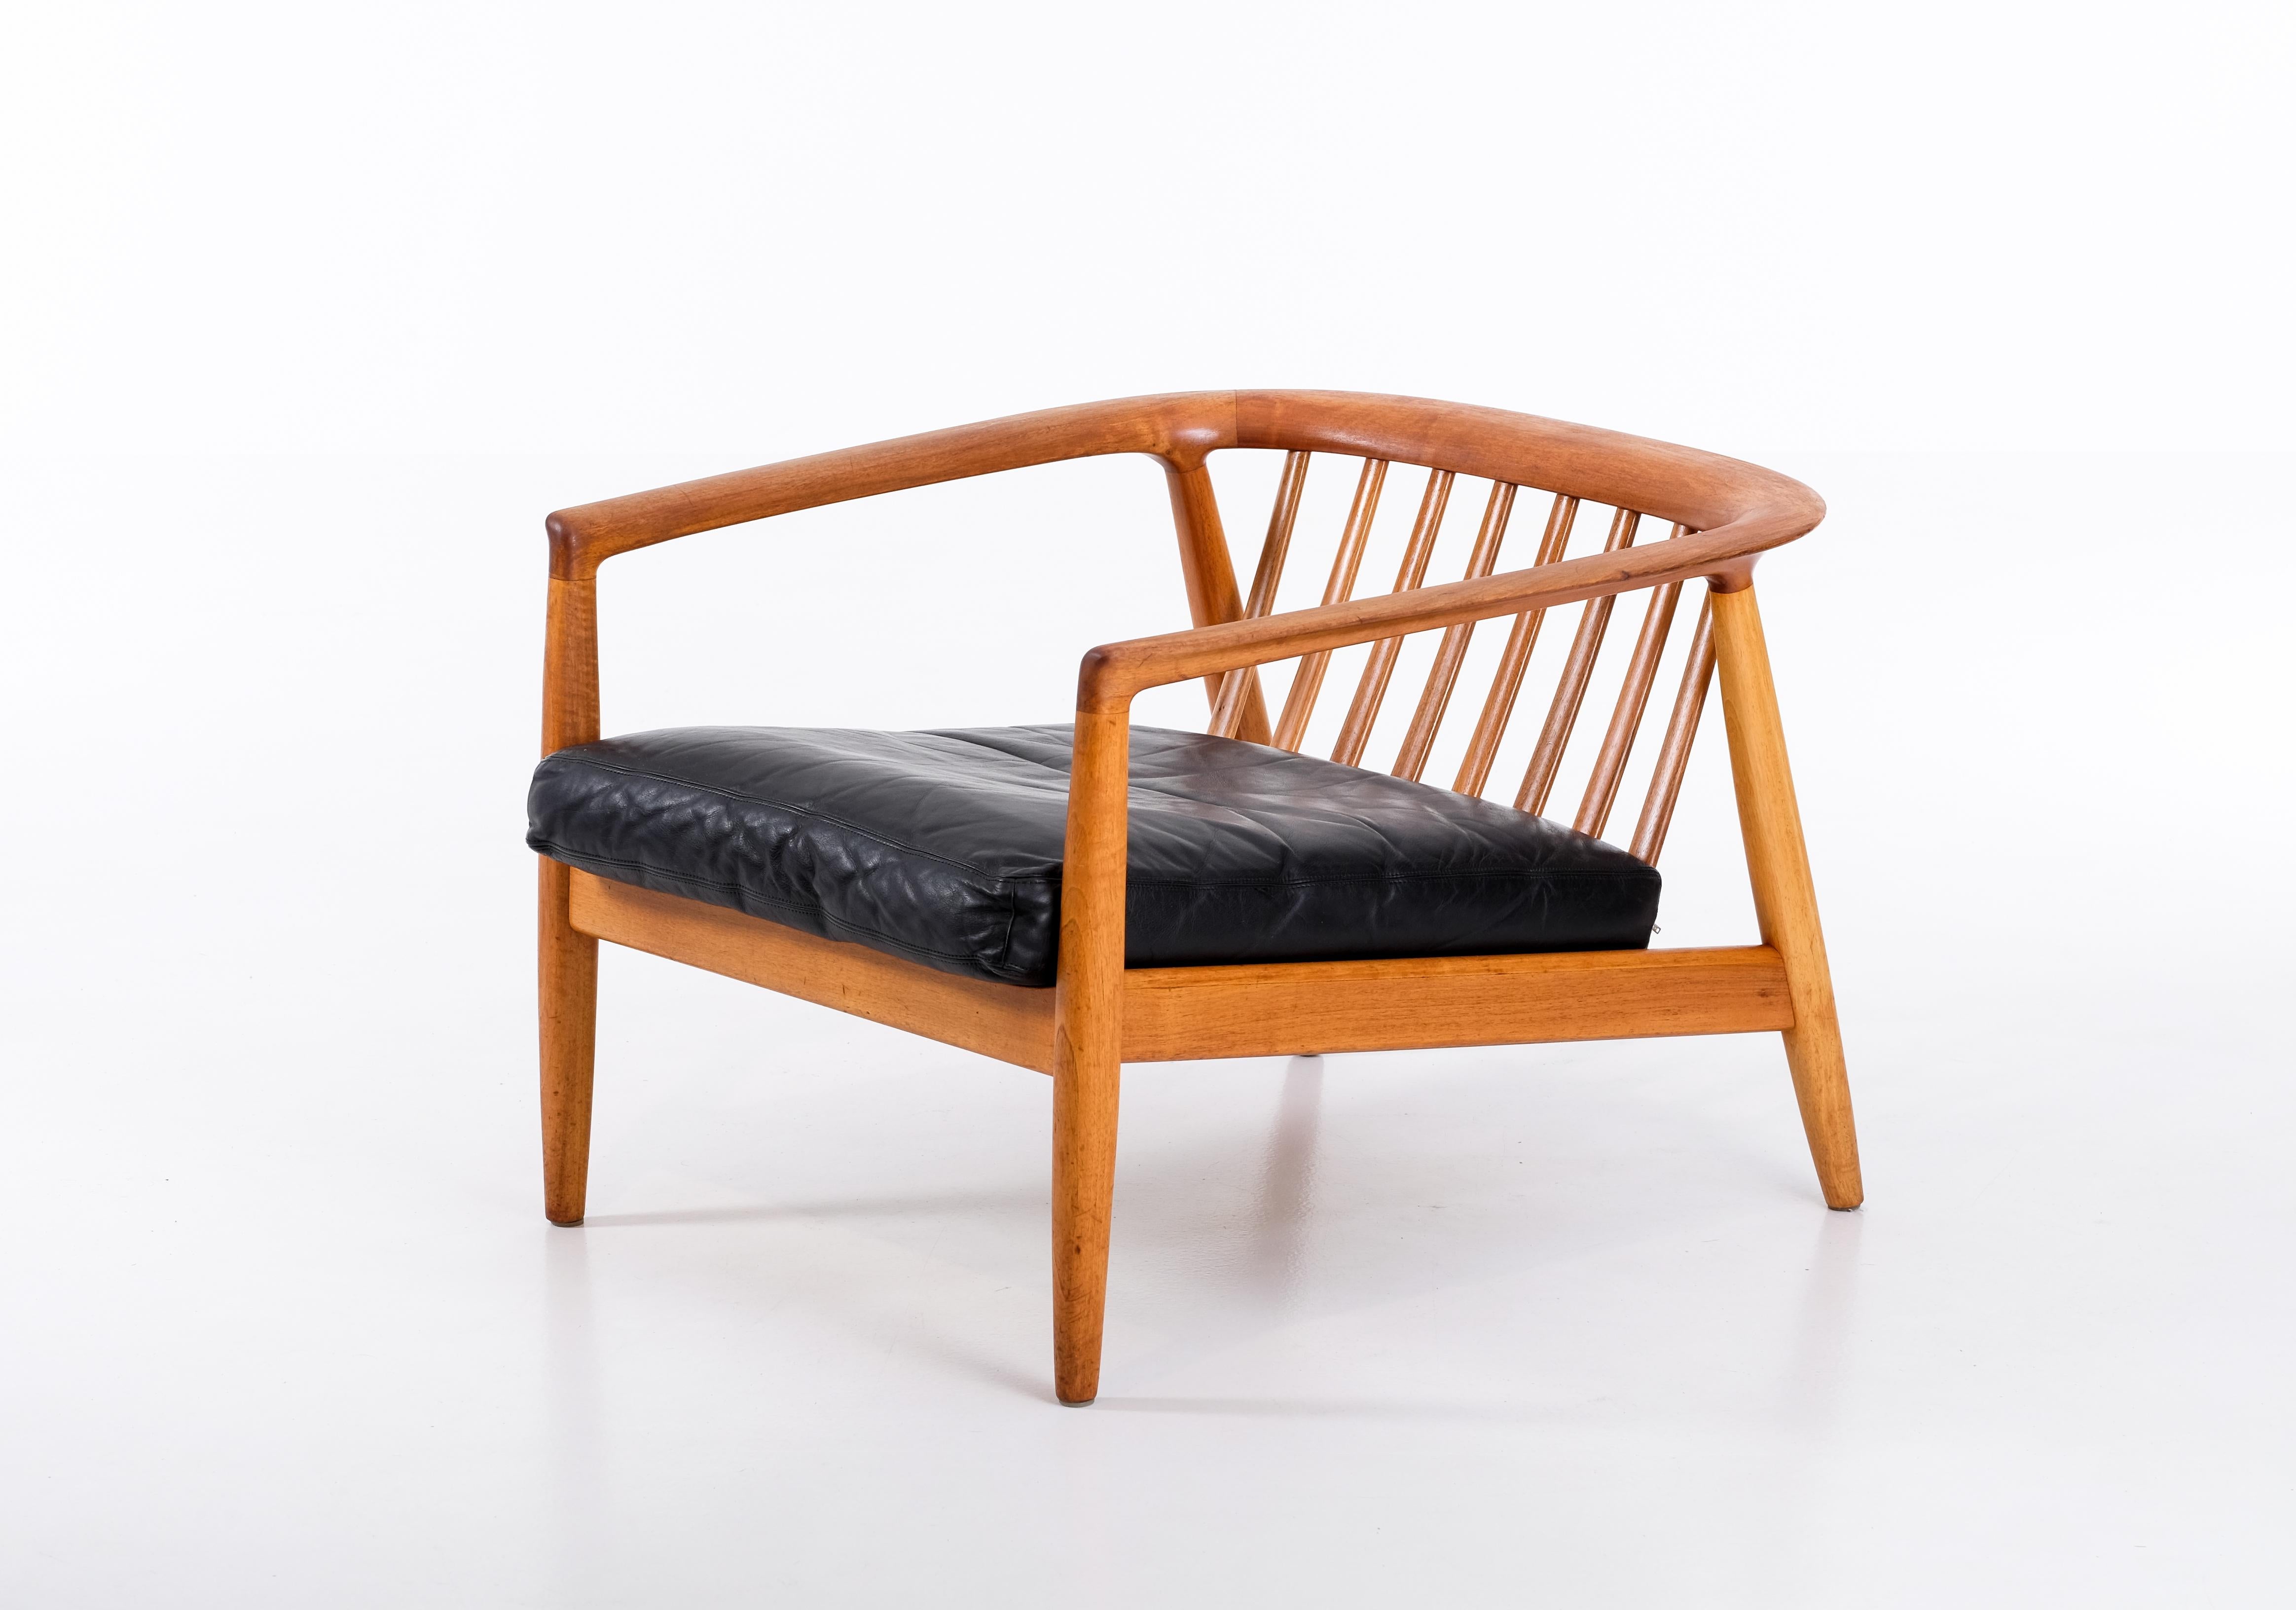 Swedish armchair in walnut by Folke Ohlsson for Bodafors, produced 1960.
Seat cushion in black leather. 



 